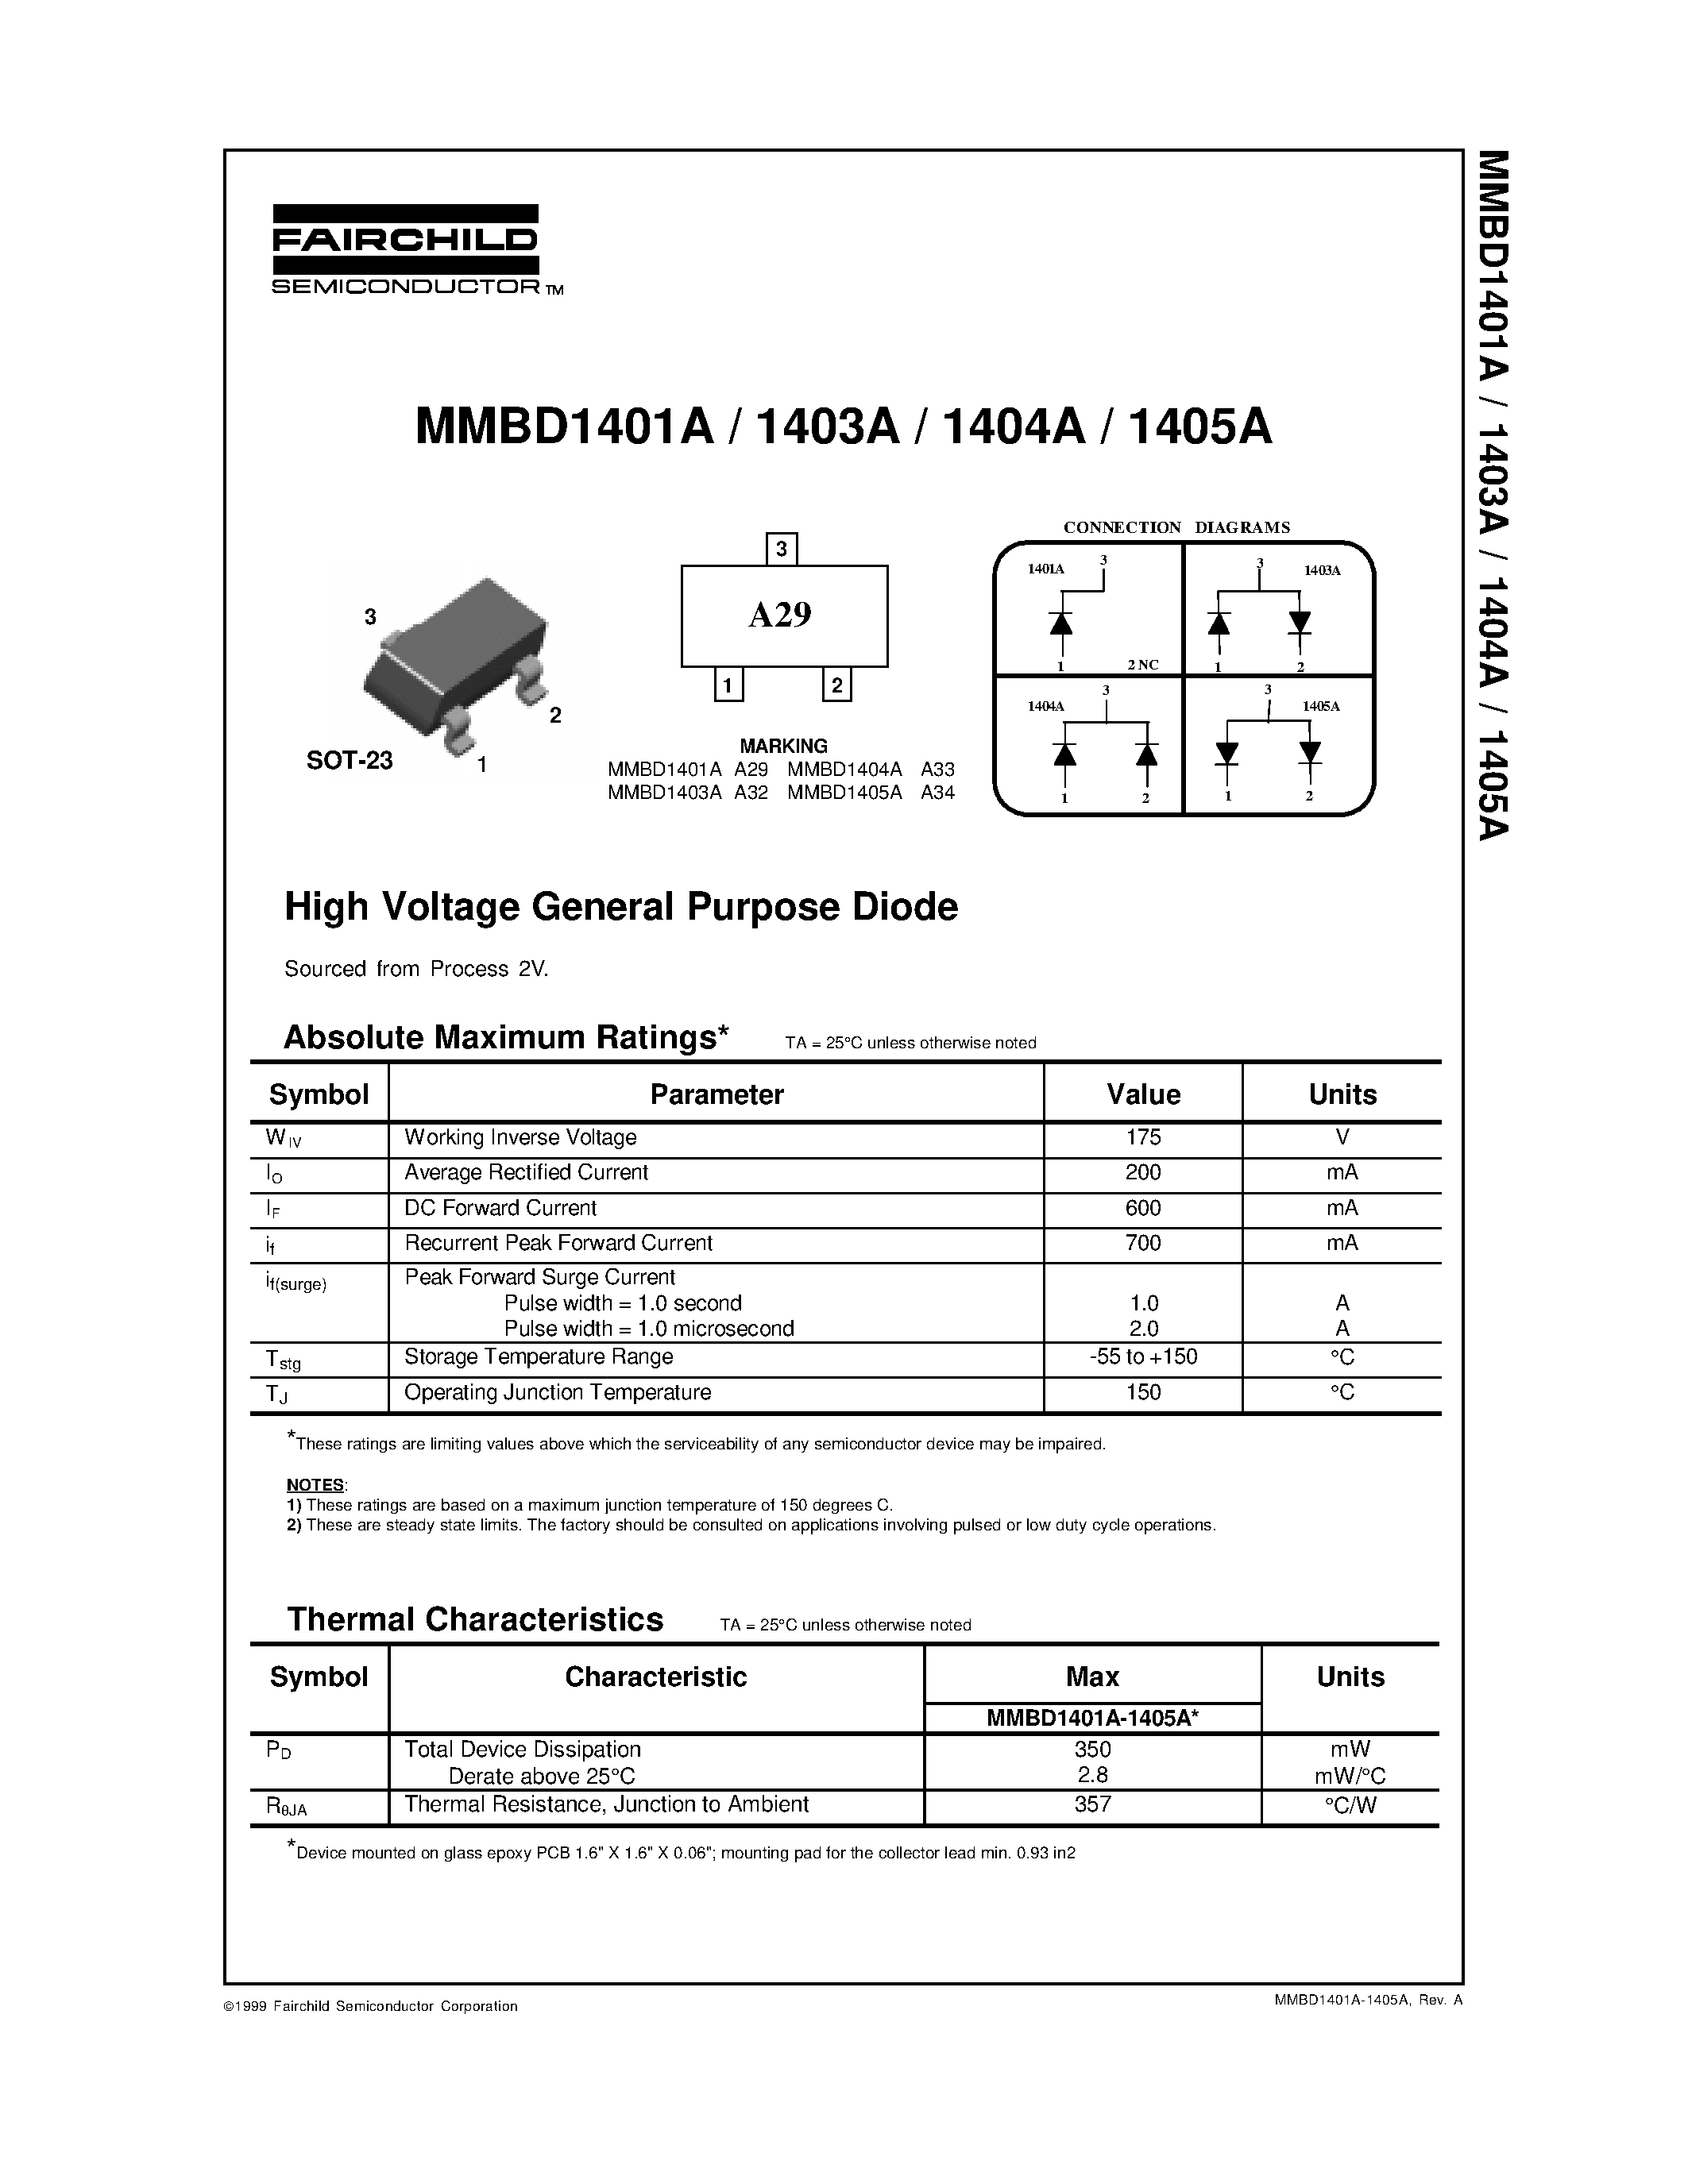 Datasheet MMBD1405A - High Voltage General Purpose Diode page 1